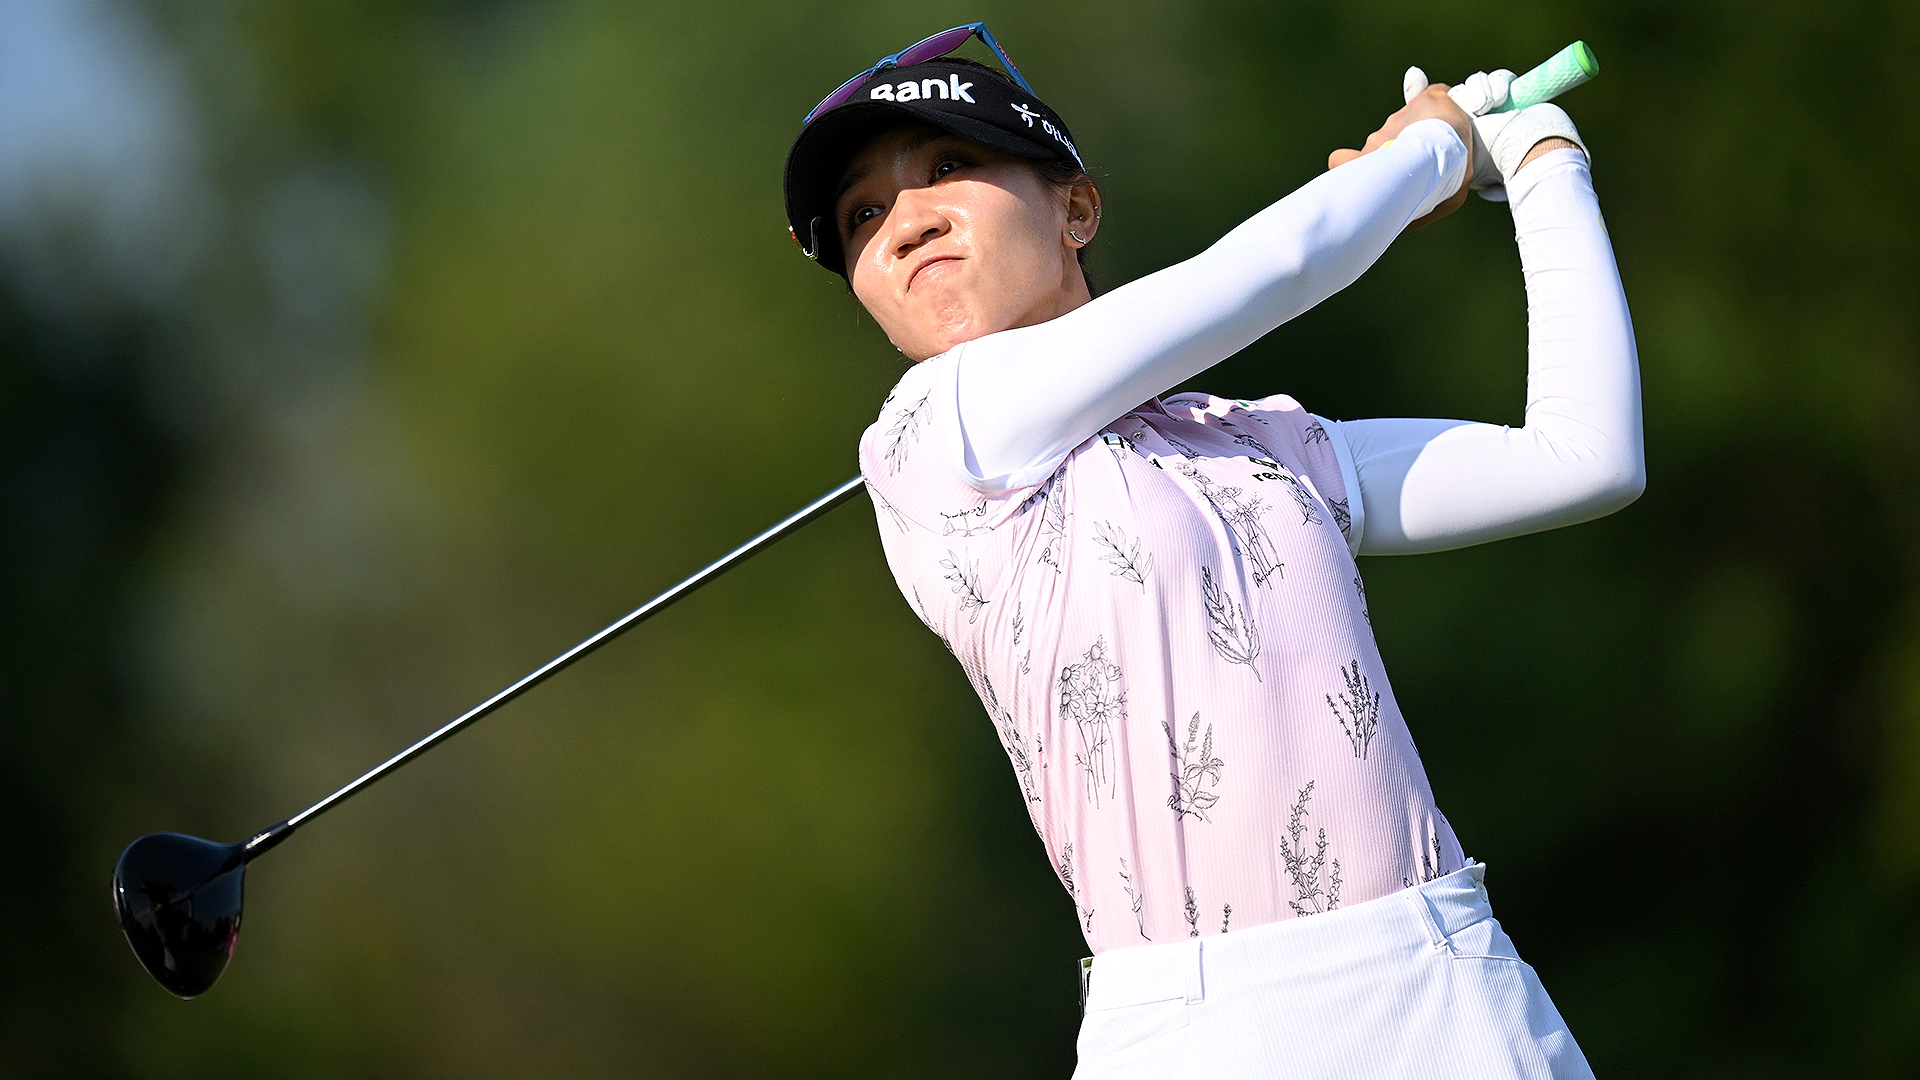 Lydia Ko continues great play, one off lead at Women’s Scottish Open